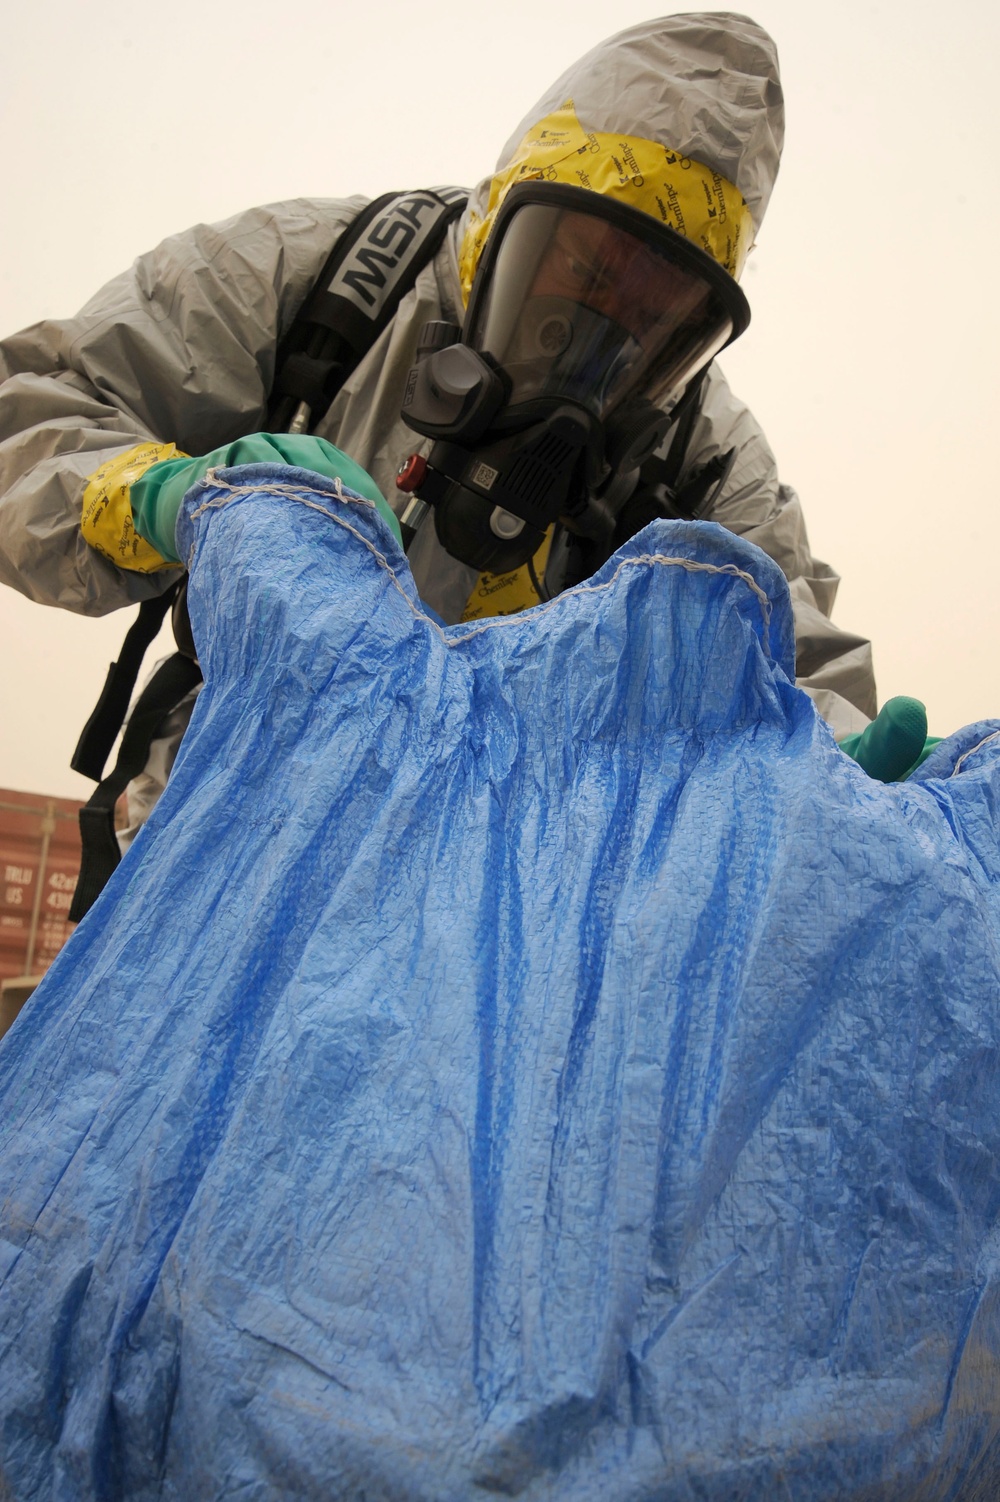 Airmen inspect exiled mail for hazardous material